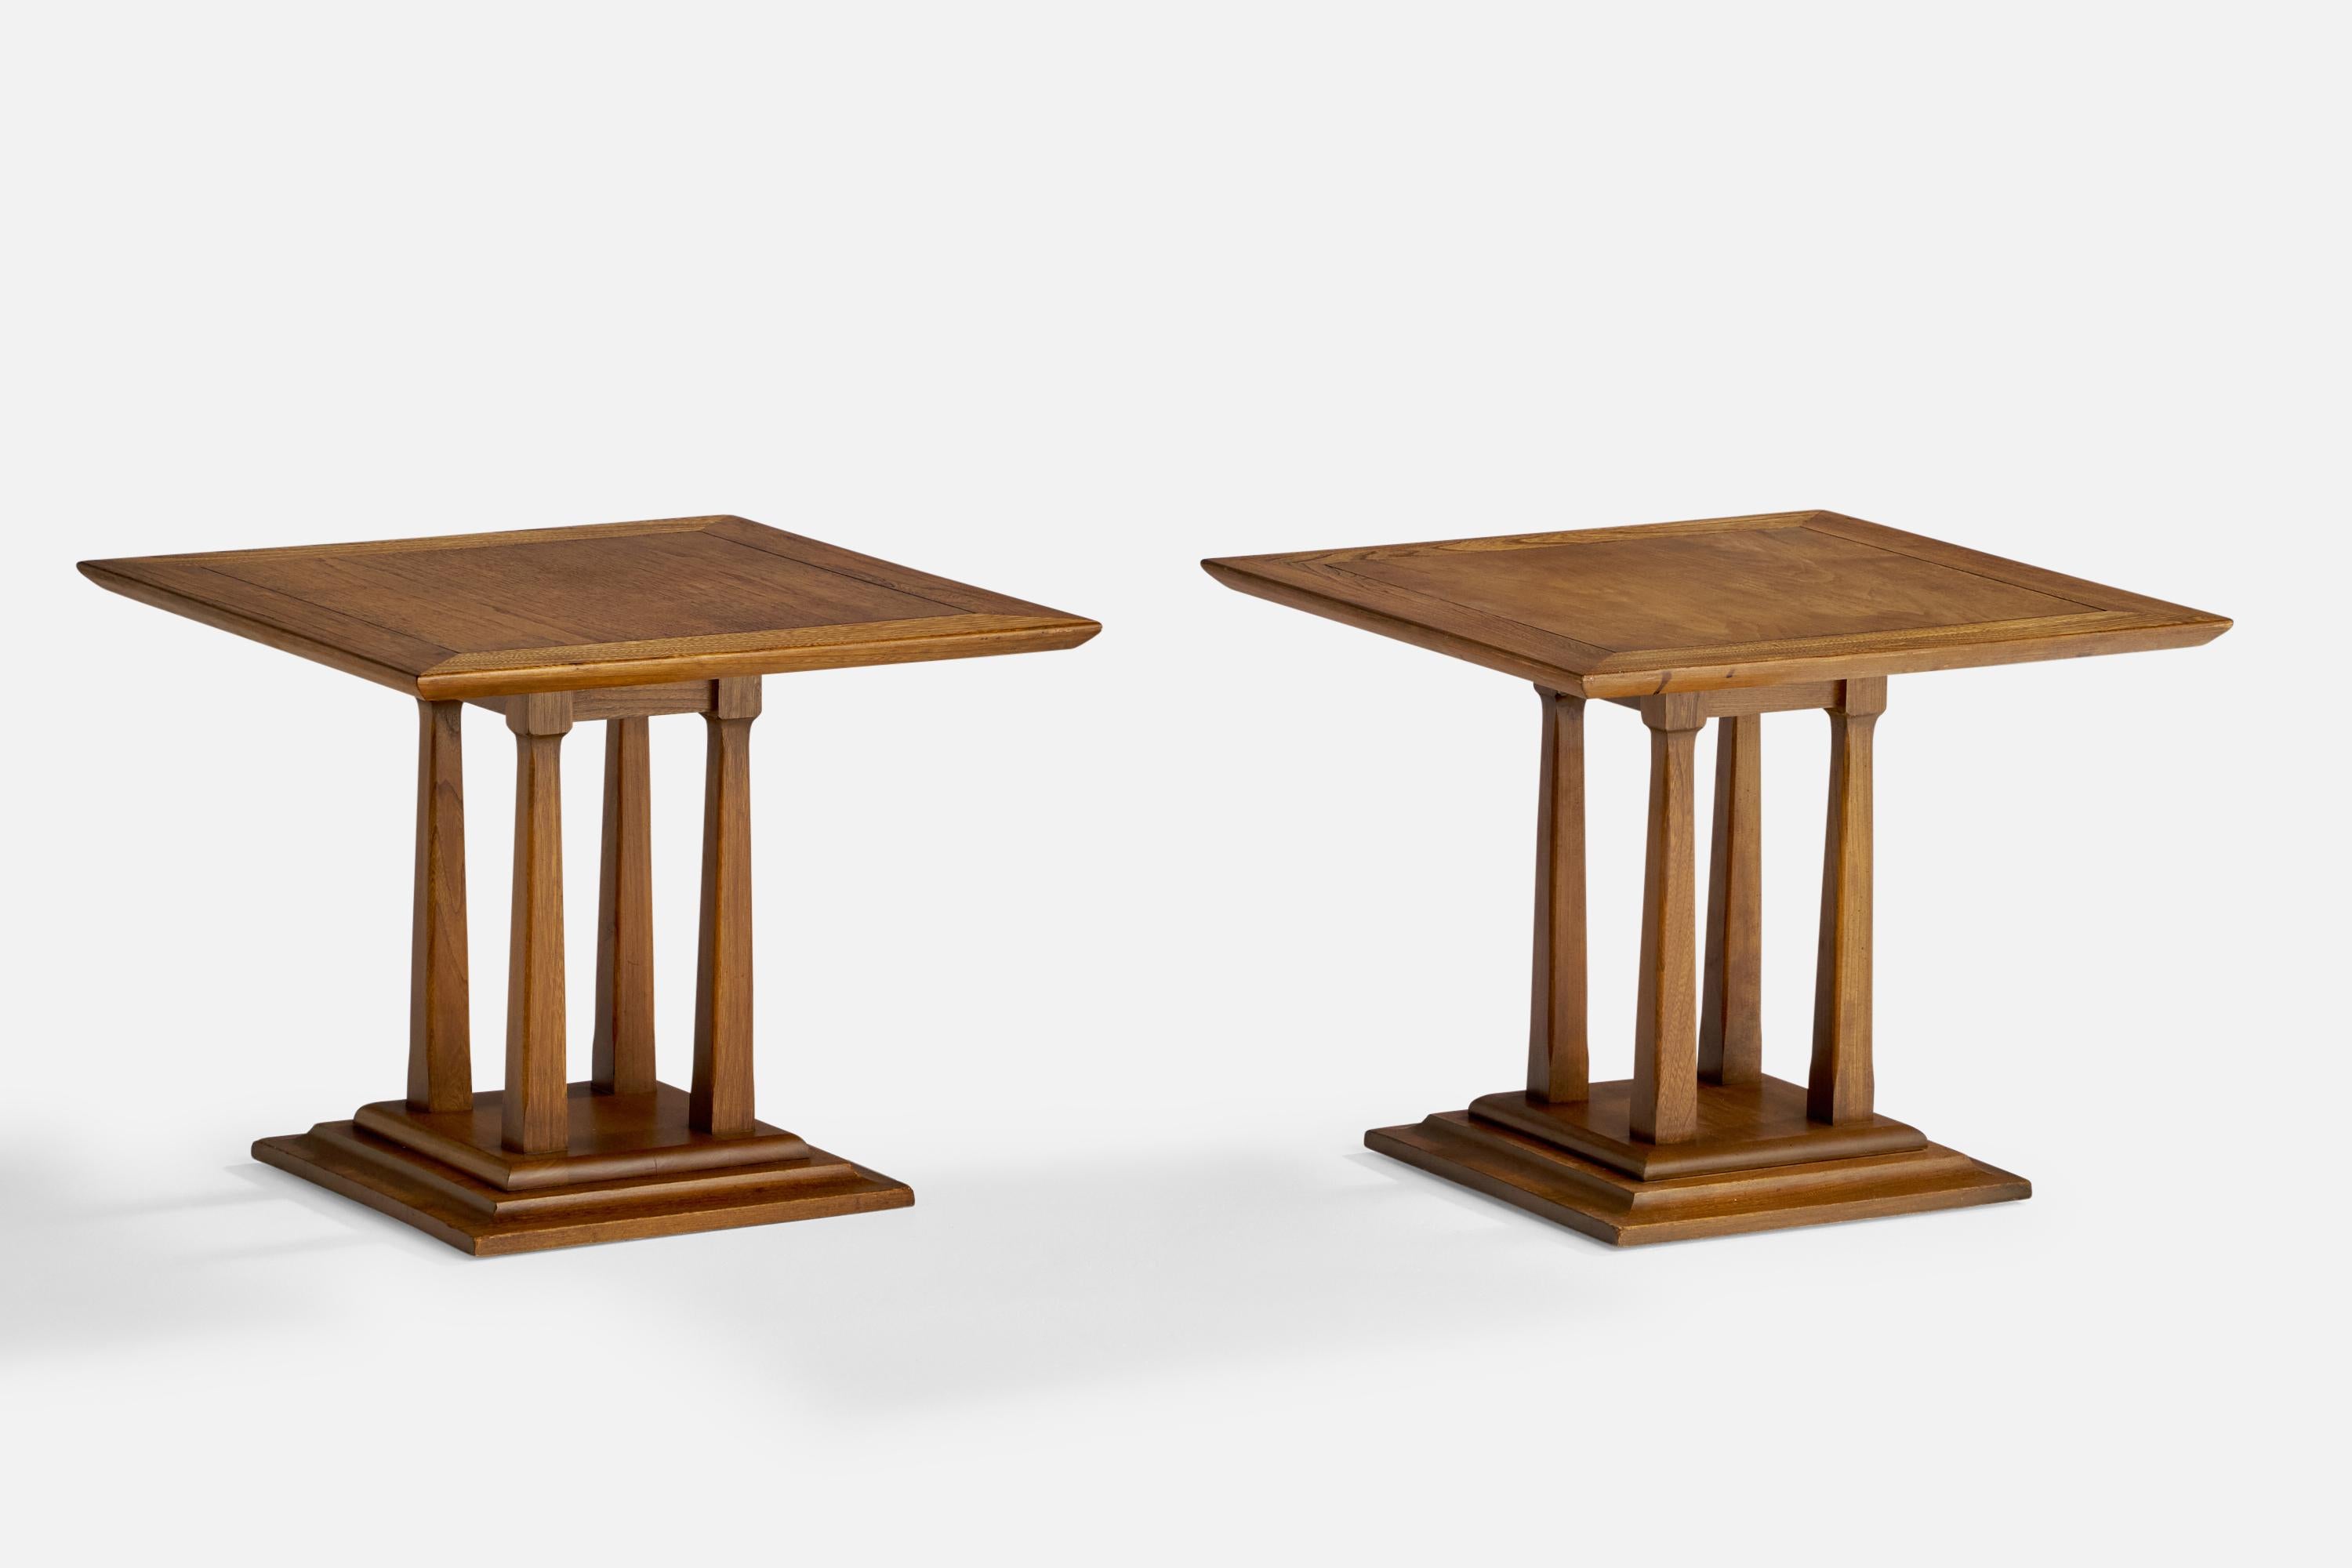 A pair of walnut side tables designed and produced in the US, 1940s.